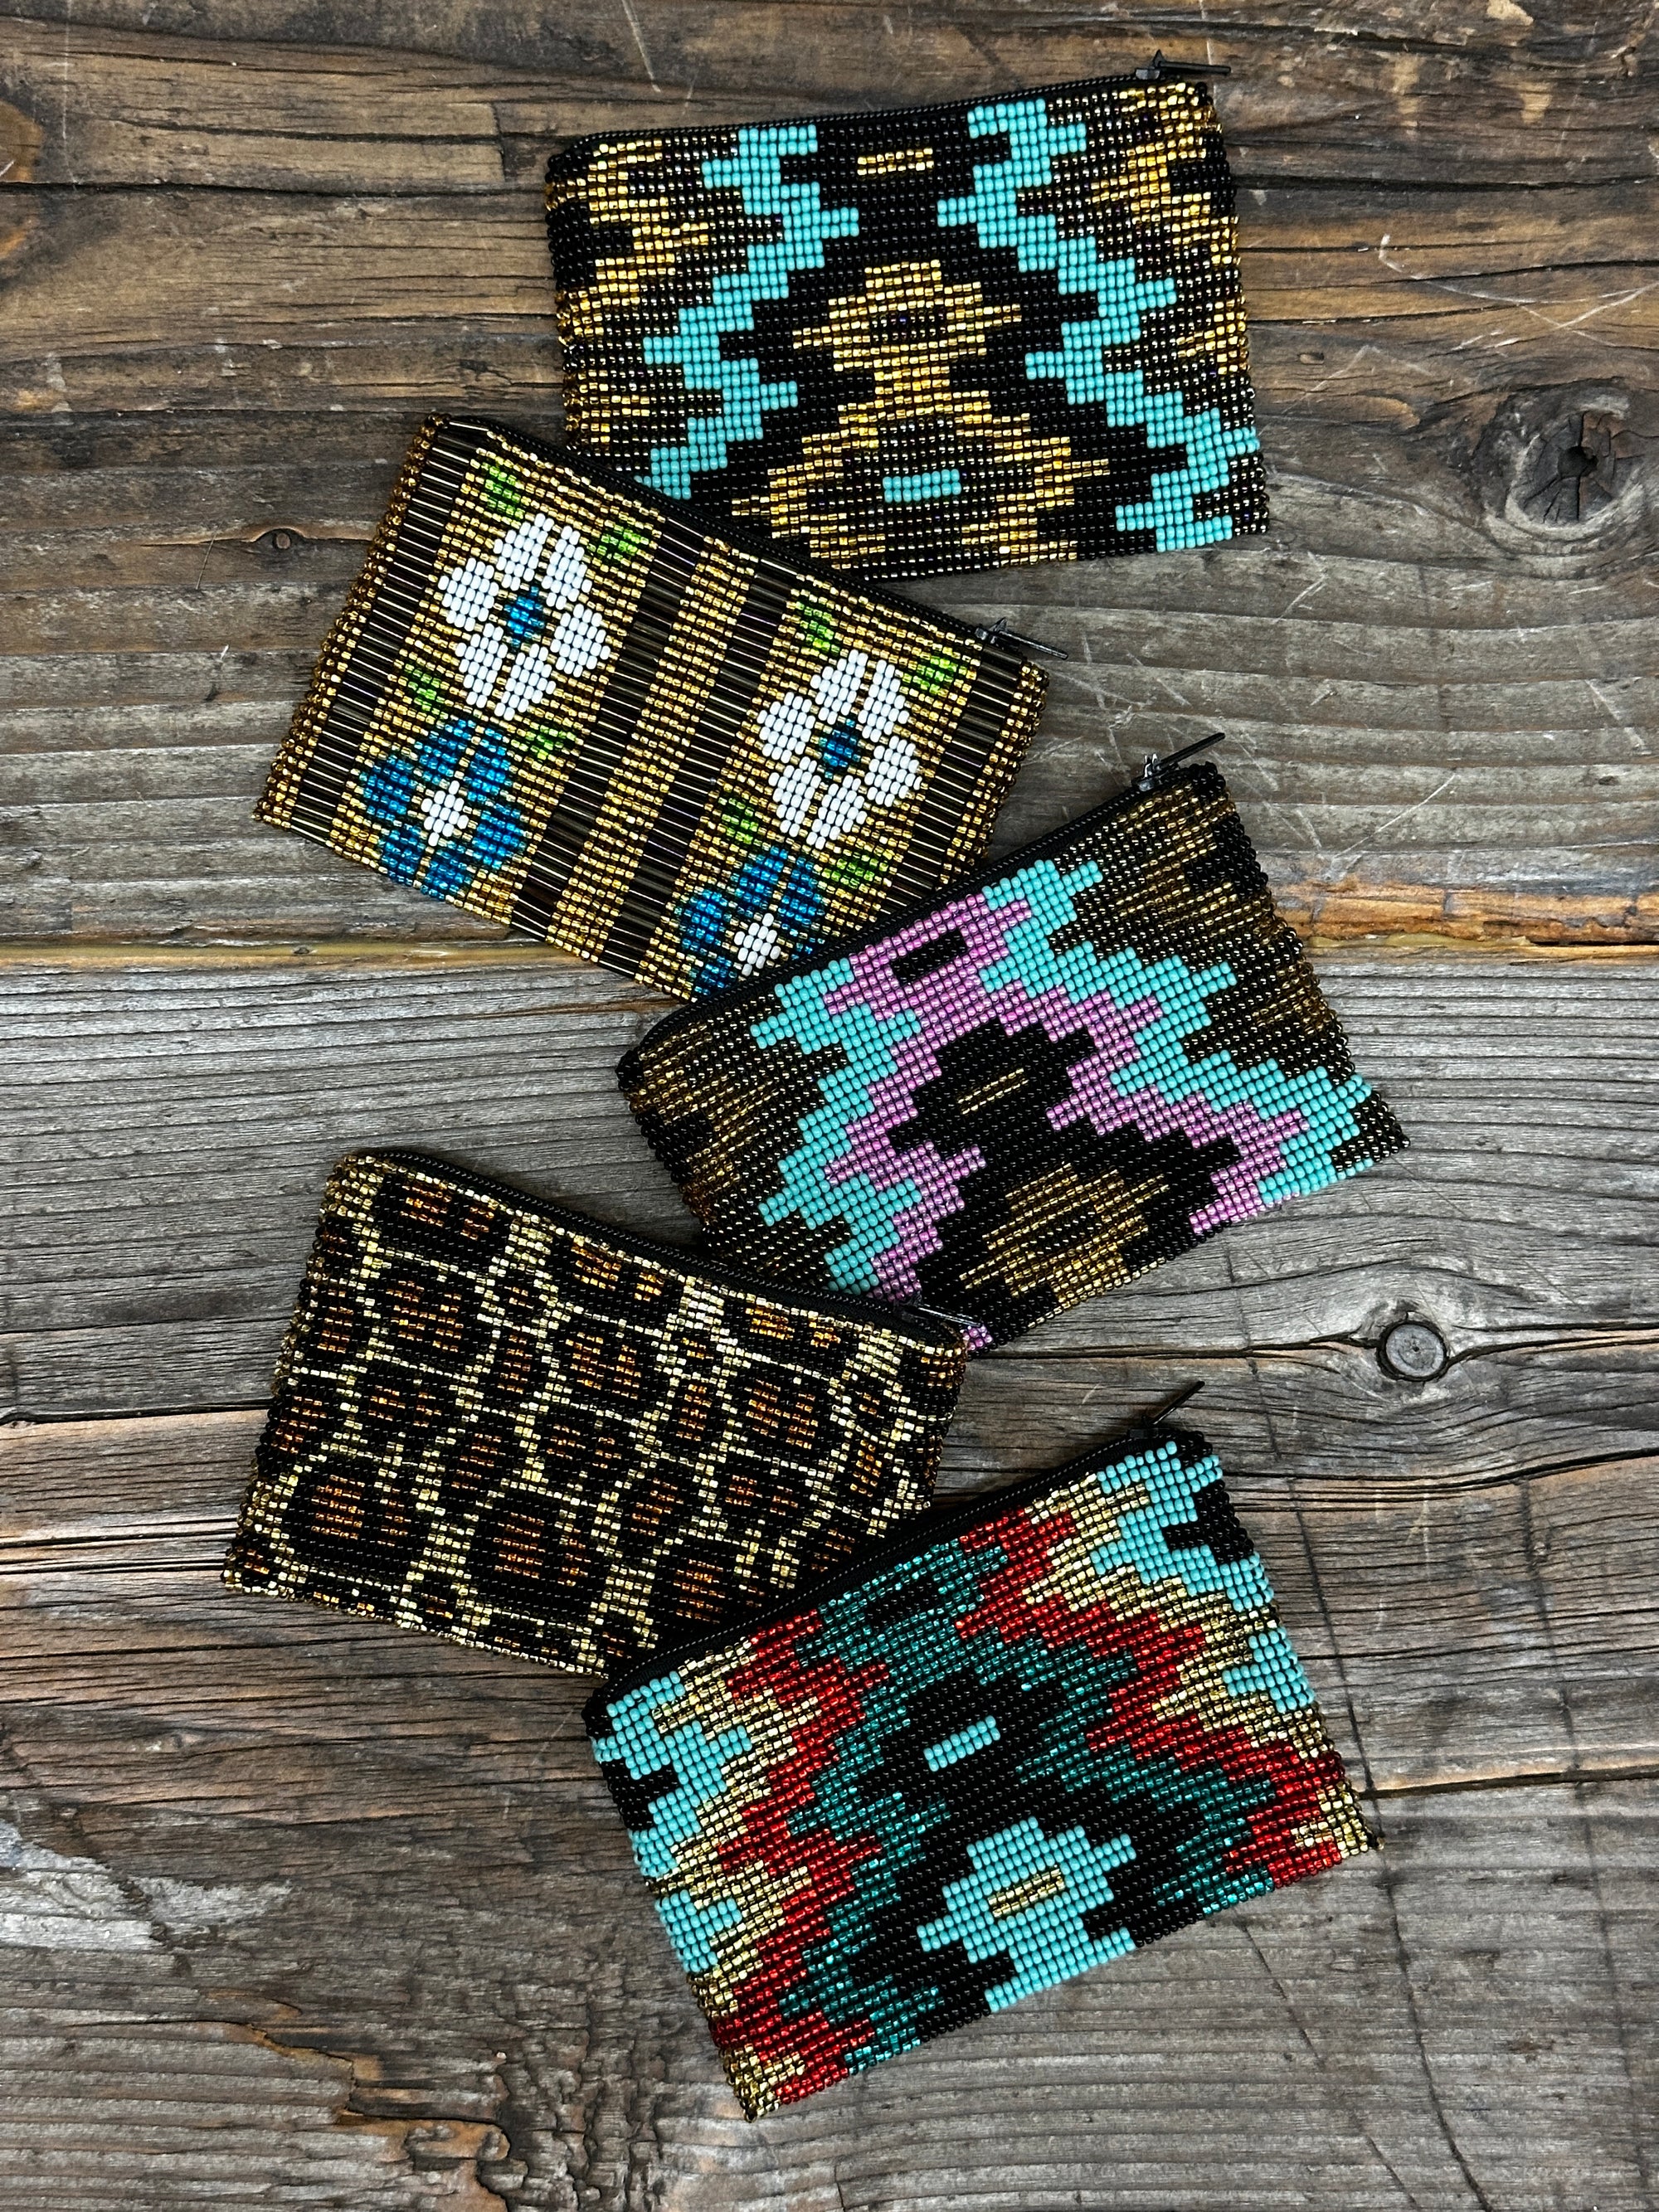 Kaqchi Beaded Zipper Pouch ~ MADE TO ORDER